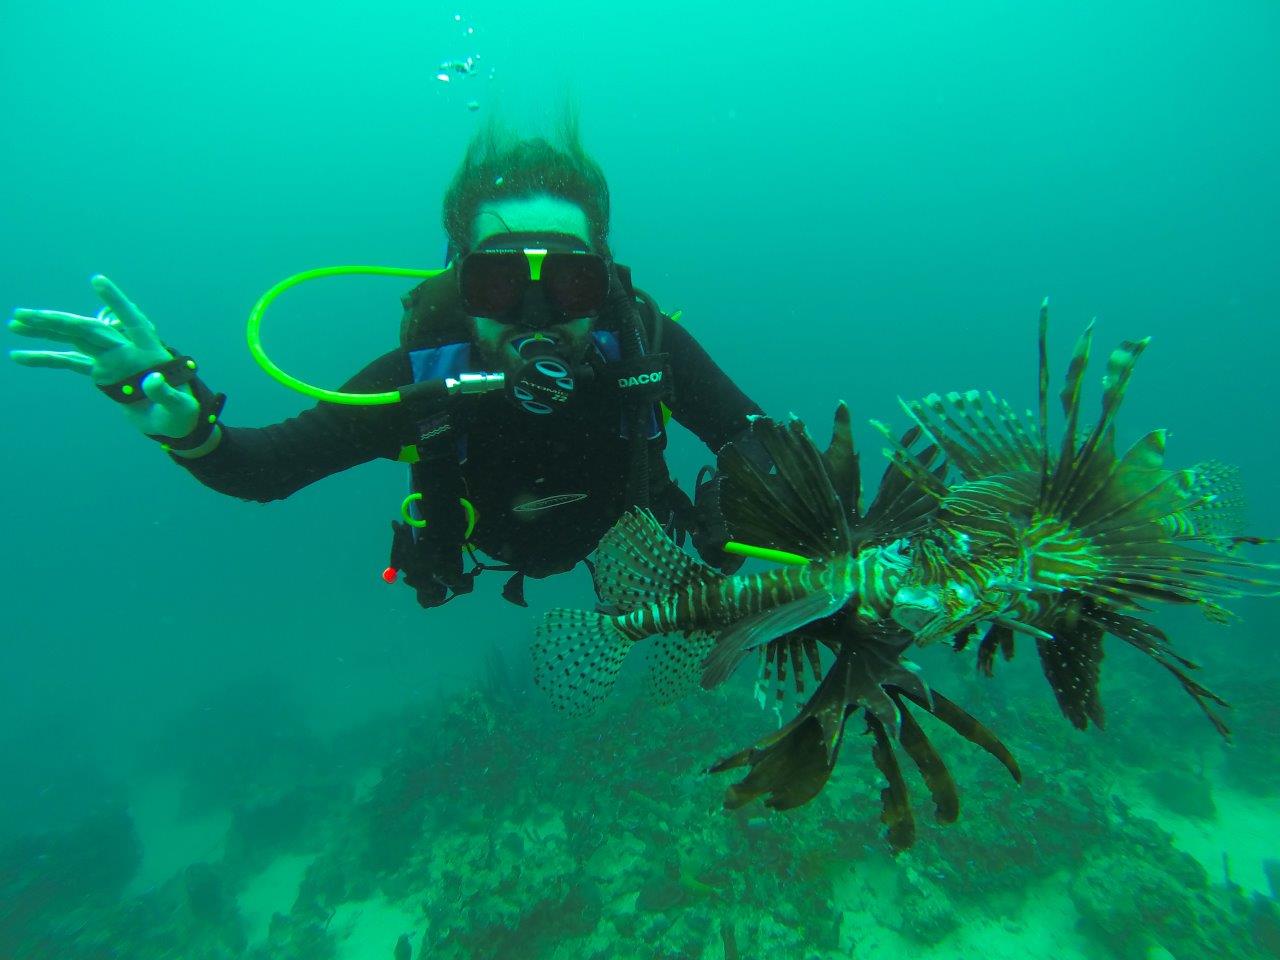 Lots of Lionfish in these old wrecks